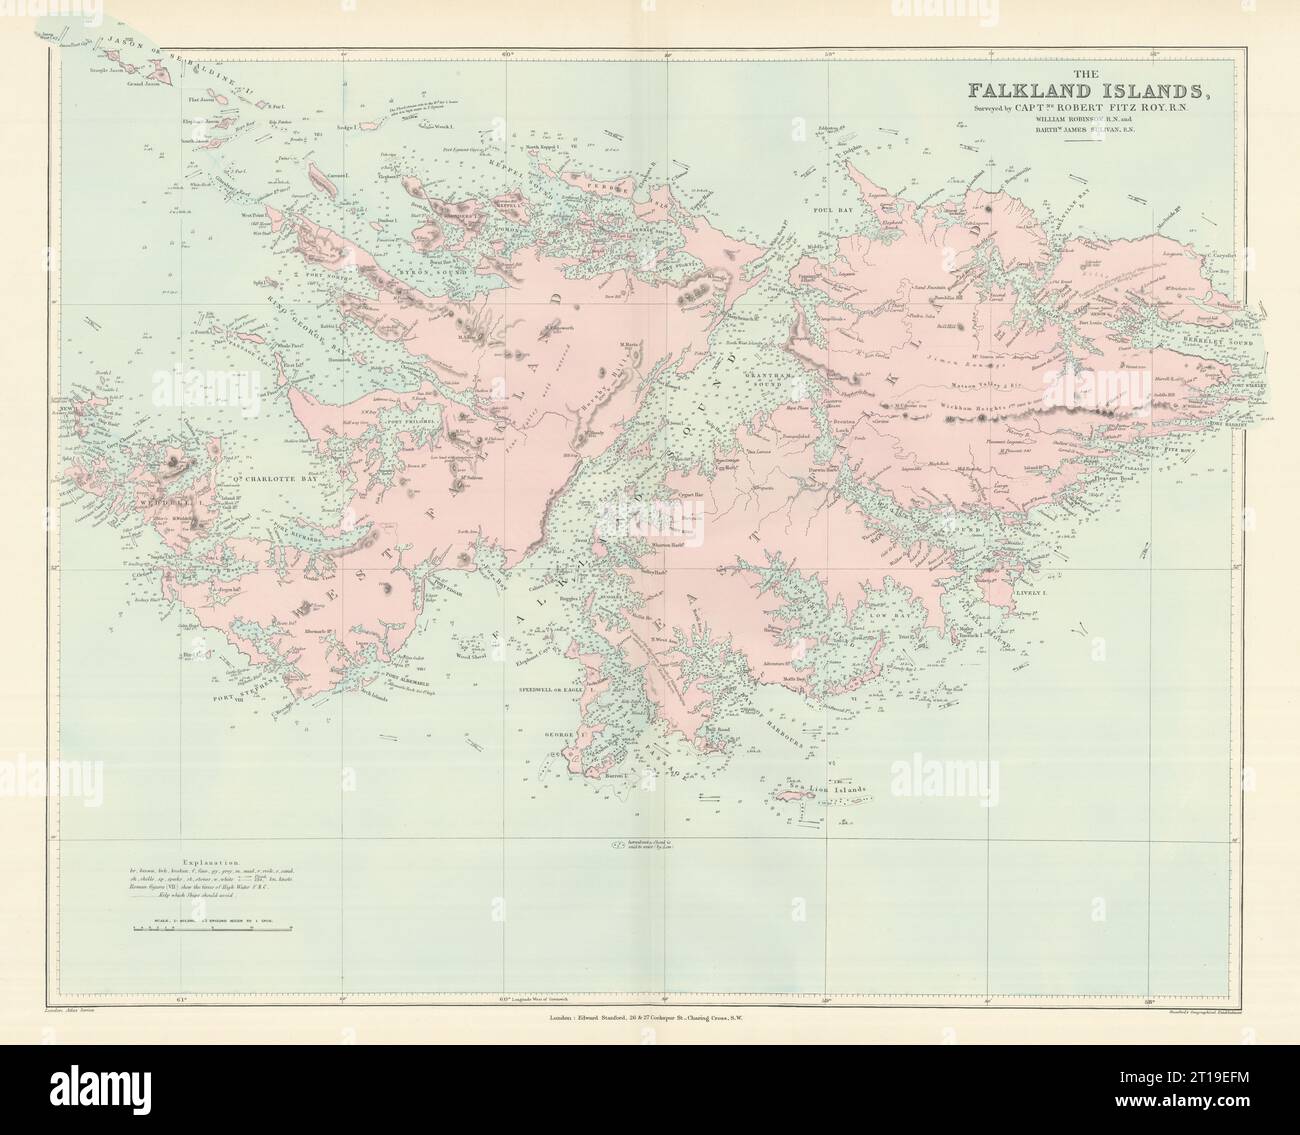 The Falkland Islands surveyed by Captain Robert Fitzroy. STANFORD 1894 old map Stock Photo